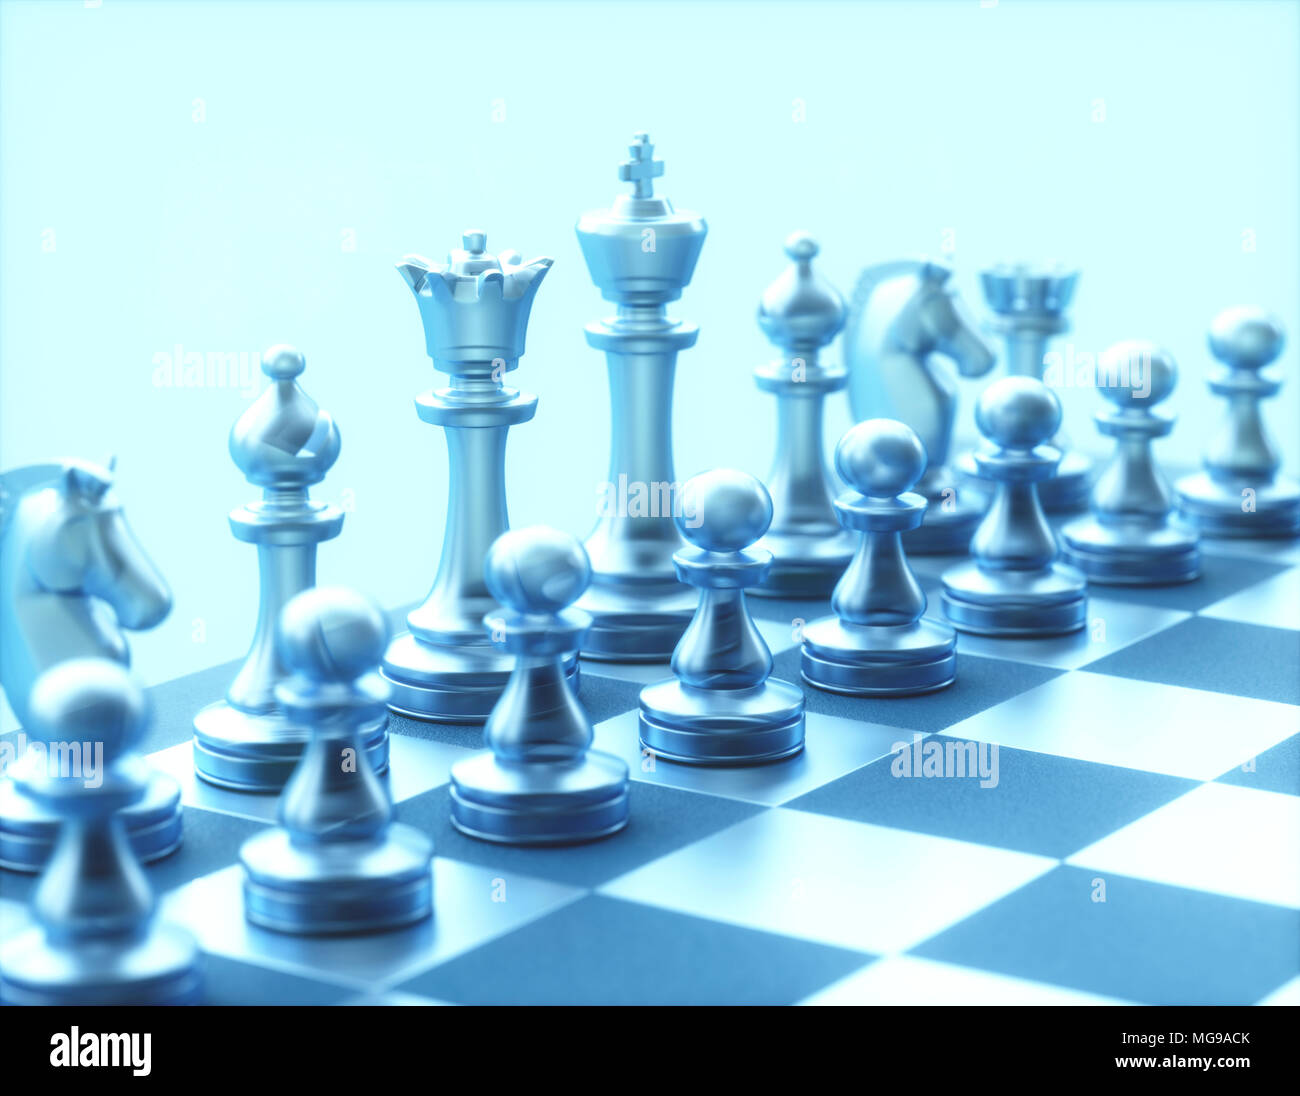 Chess pieces on board. Stock Photo